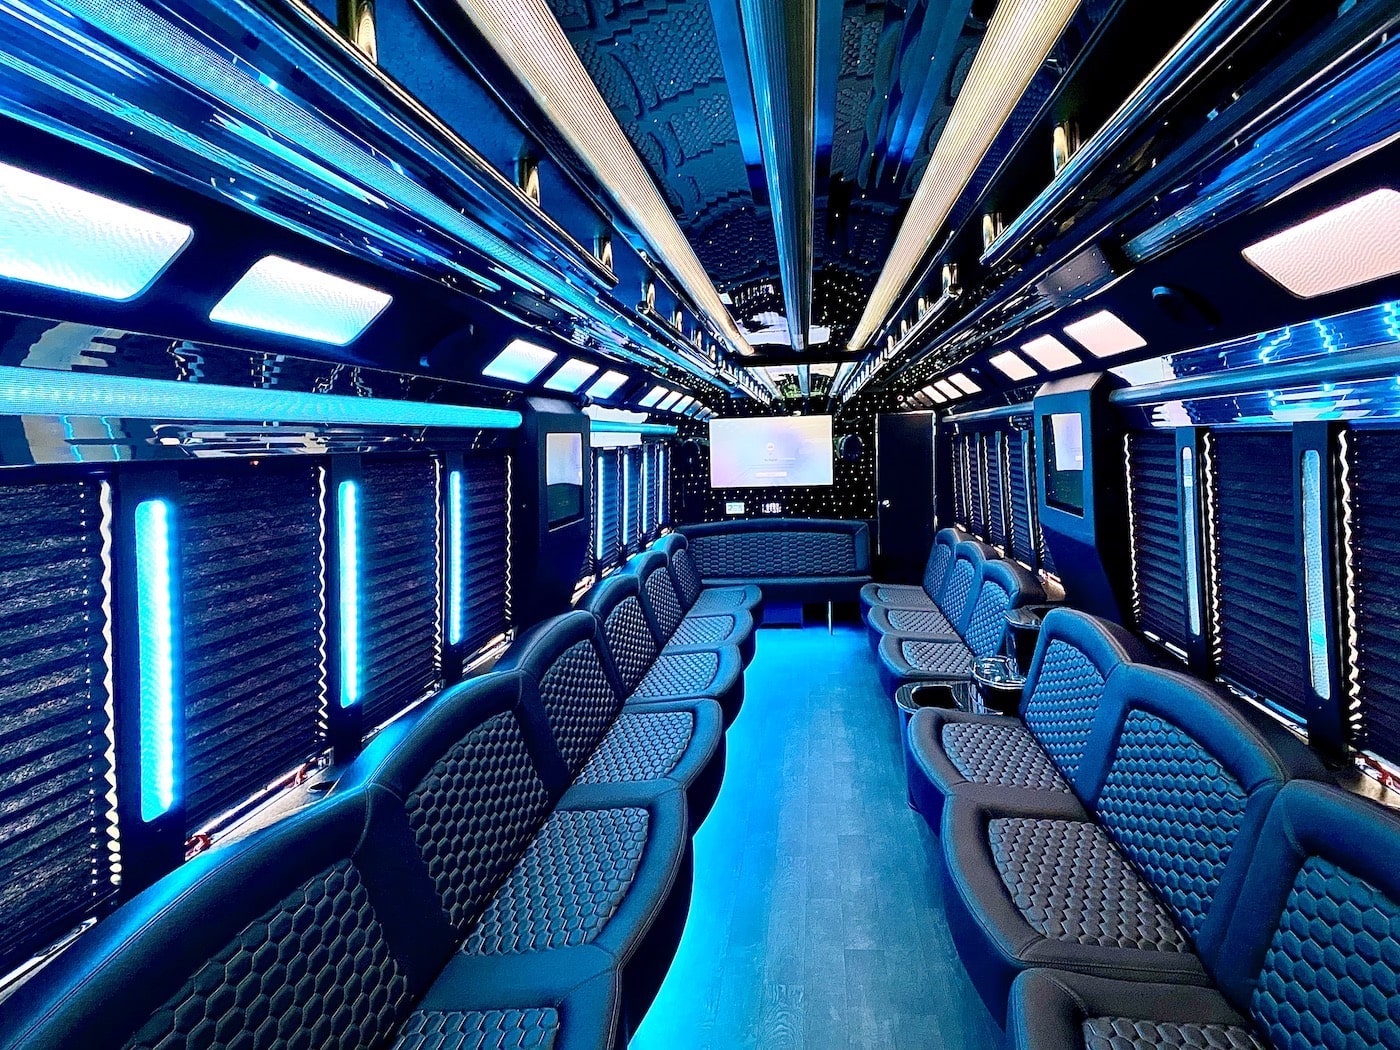 No Party Is Too Big for Party Bus Rental